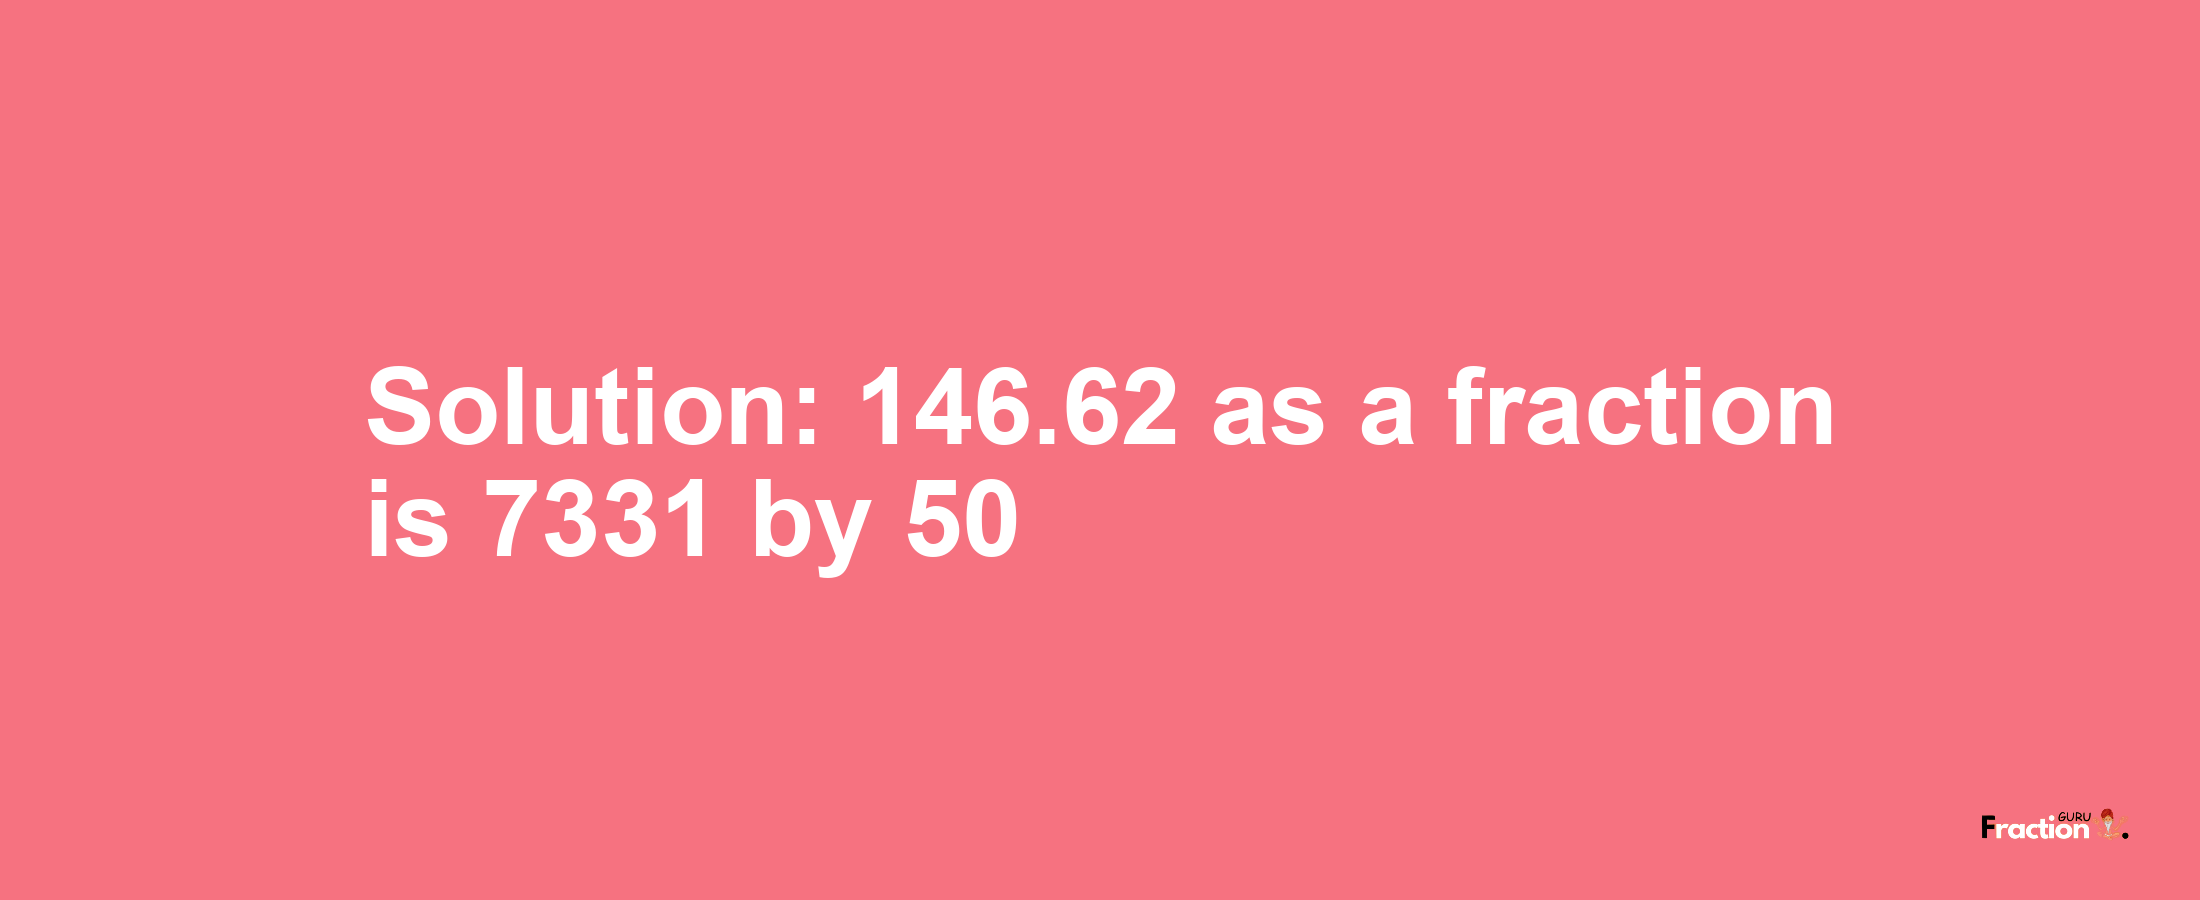 Solution:146.62 as a fraction is 7331/50